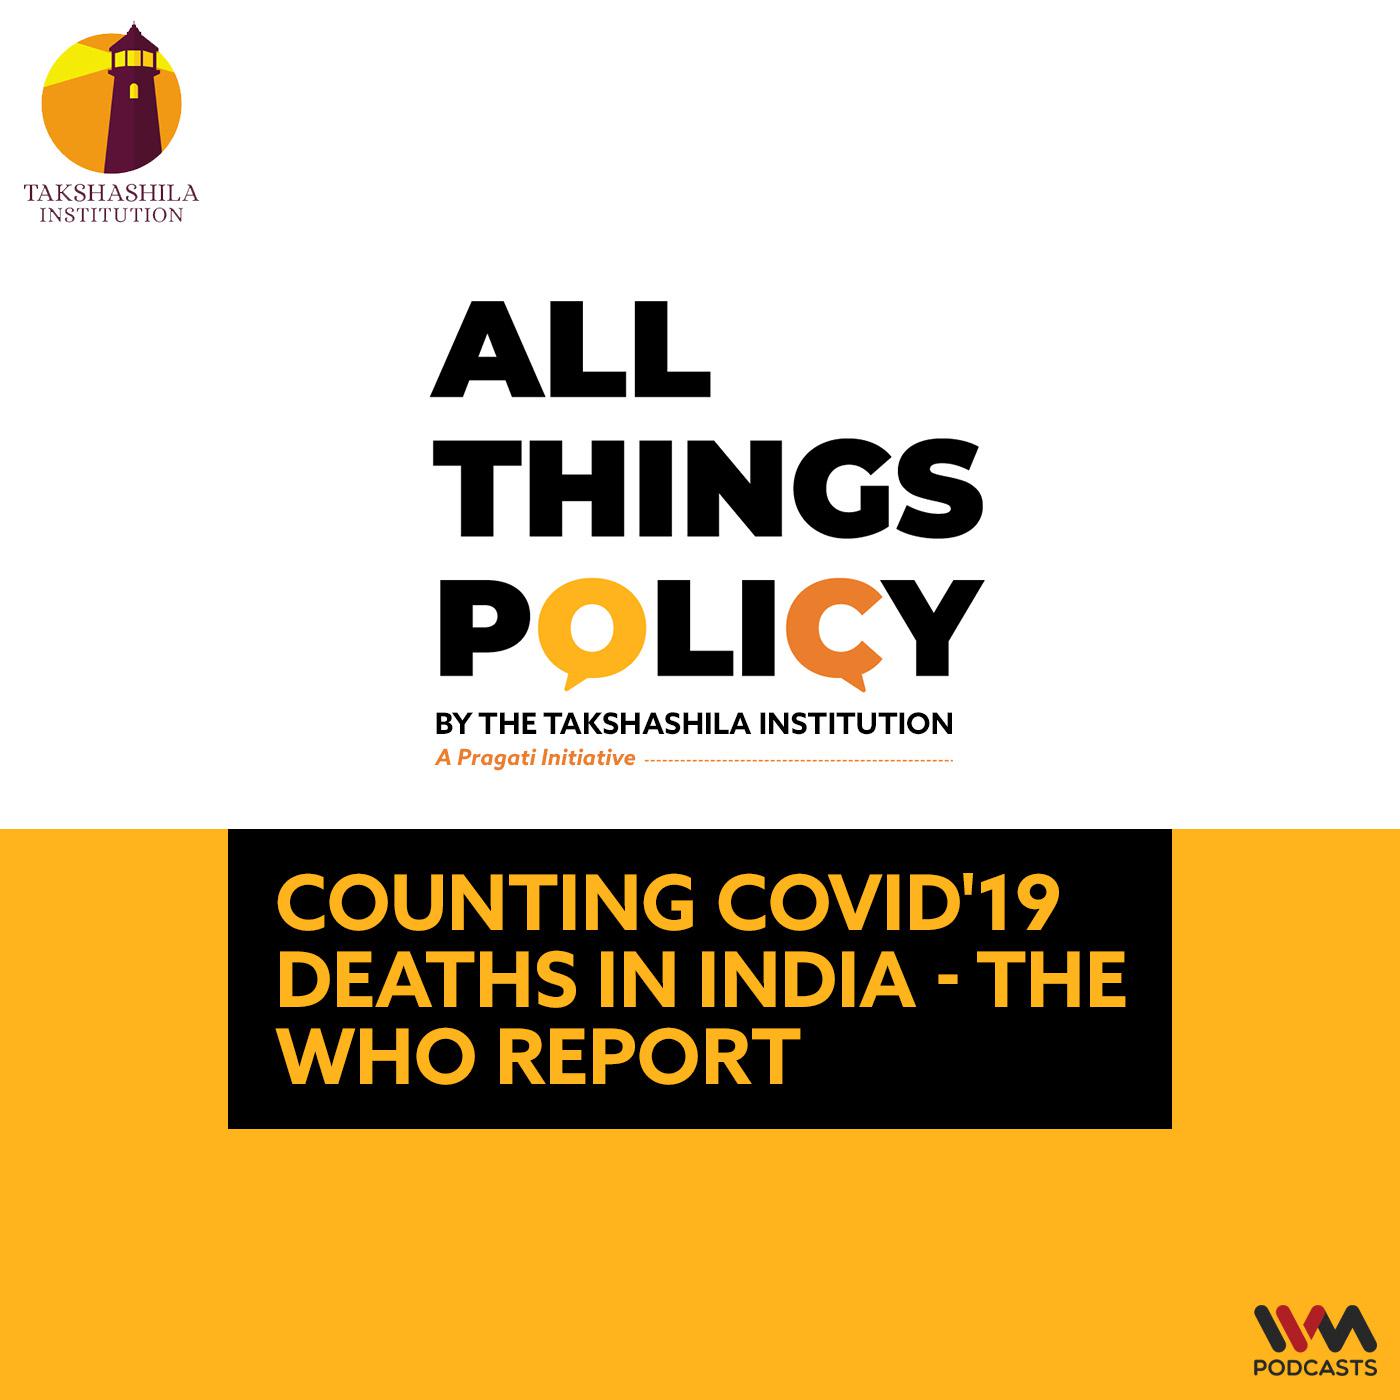 Counting COVID'19 deaths in India- The WHO report